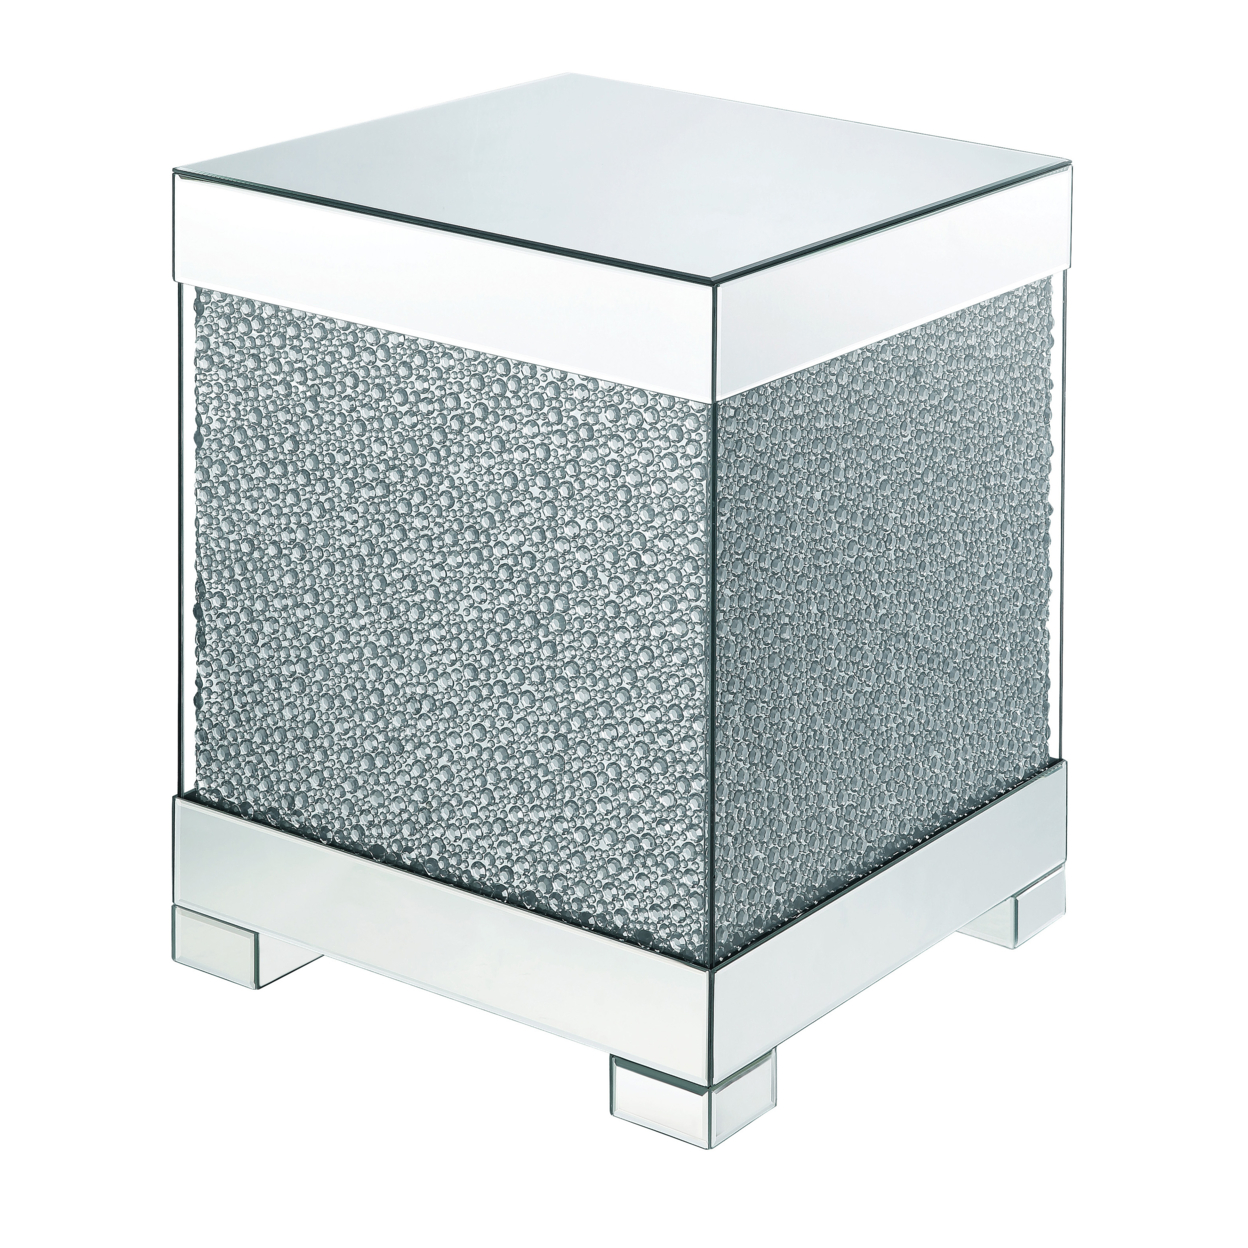 Contemporary Square Wooden End Table With Faux Crystal Inlays, Silver- Saltoro Sherpi